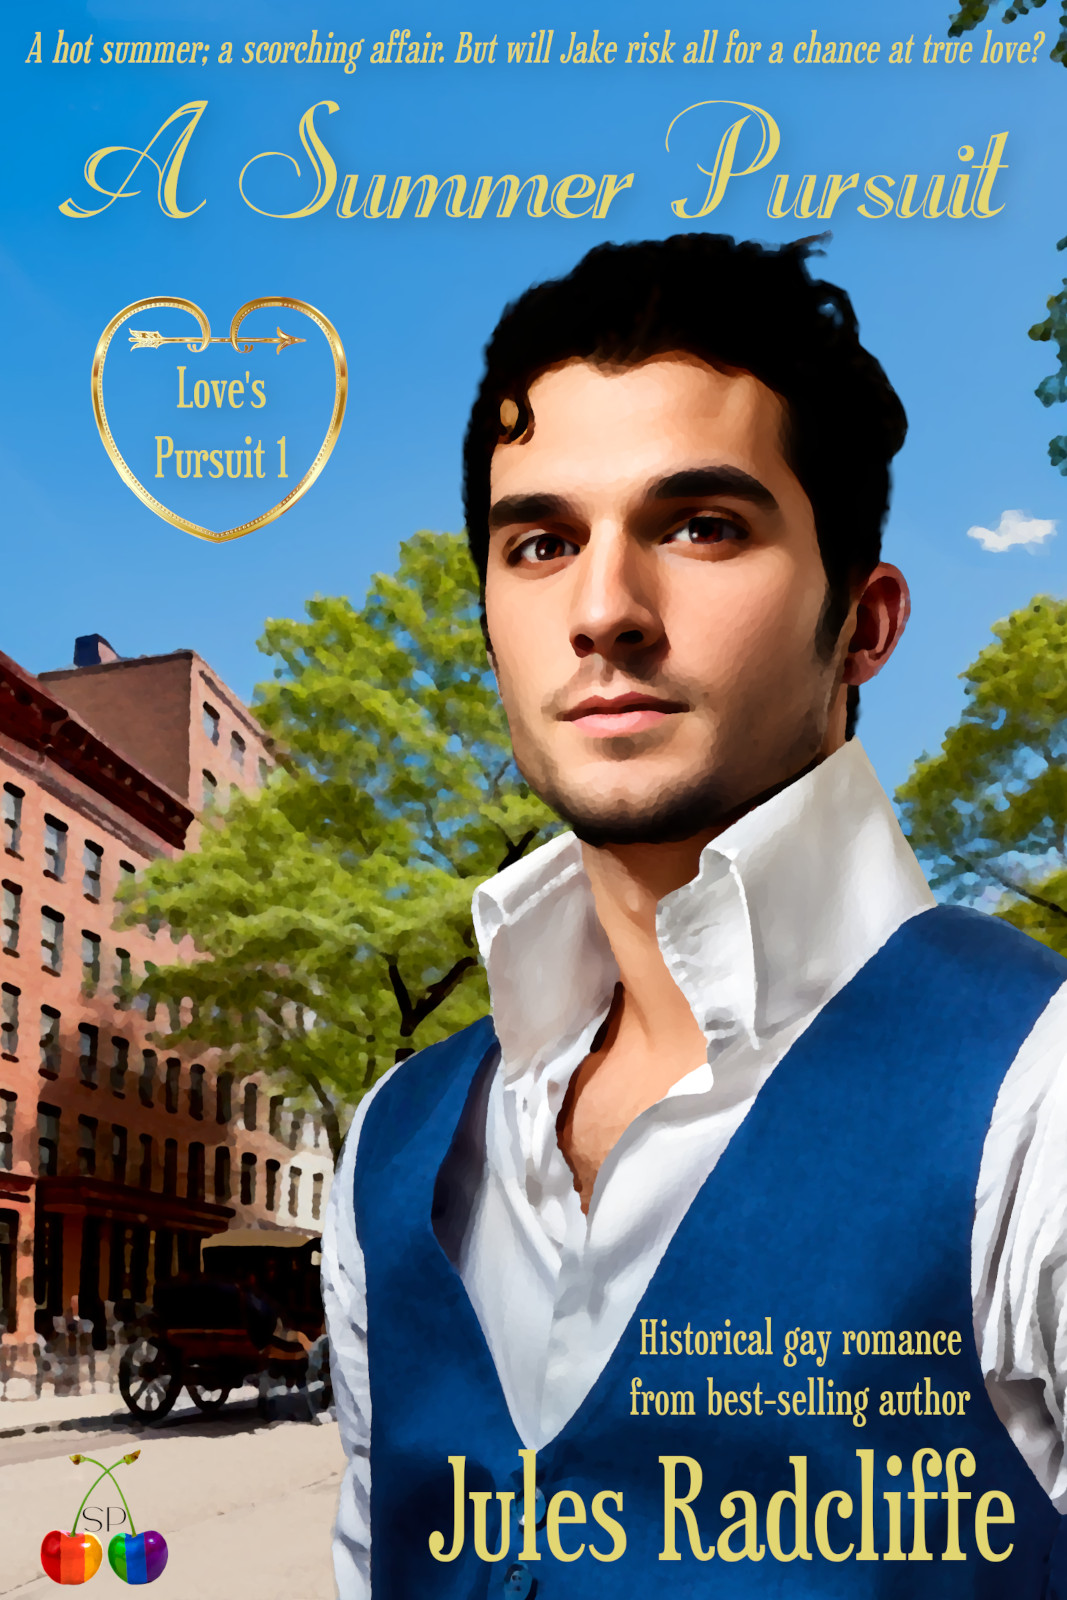 Cover of A Summer Pursuit by Jules Radcliffe